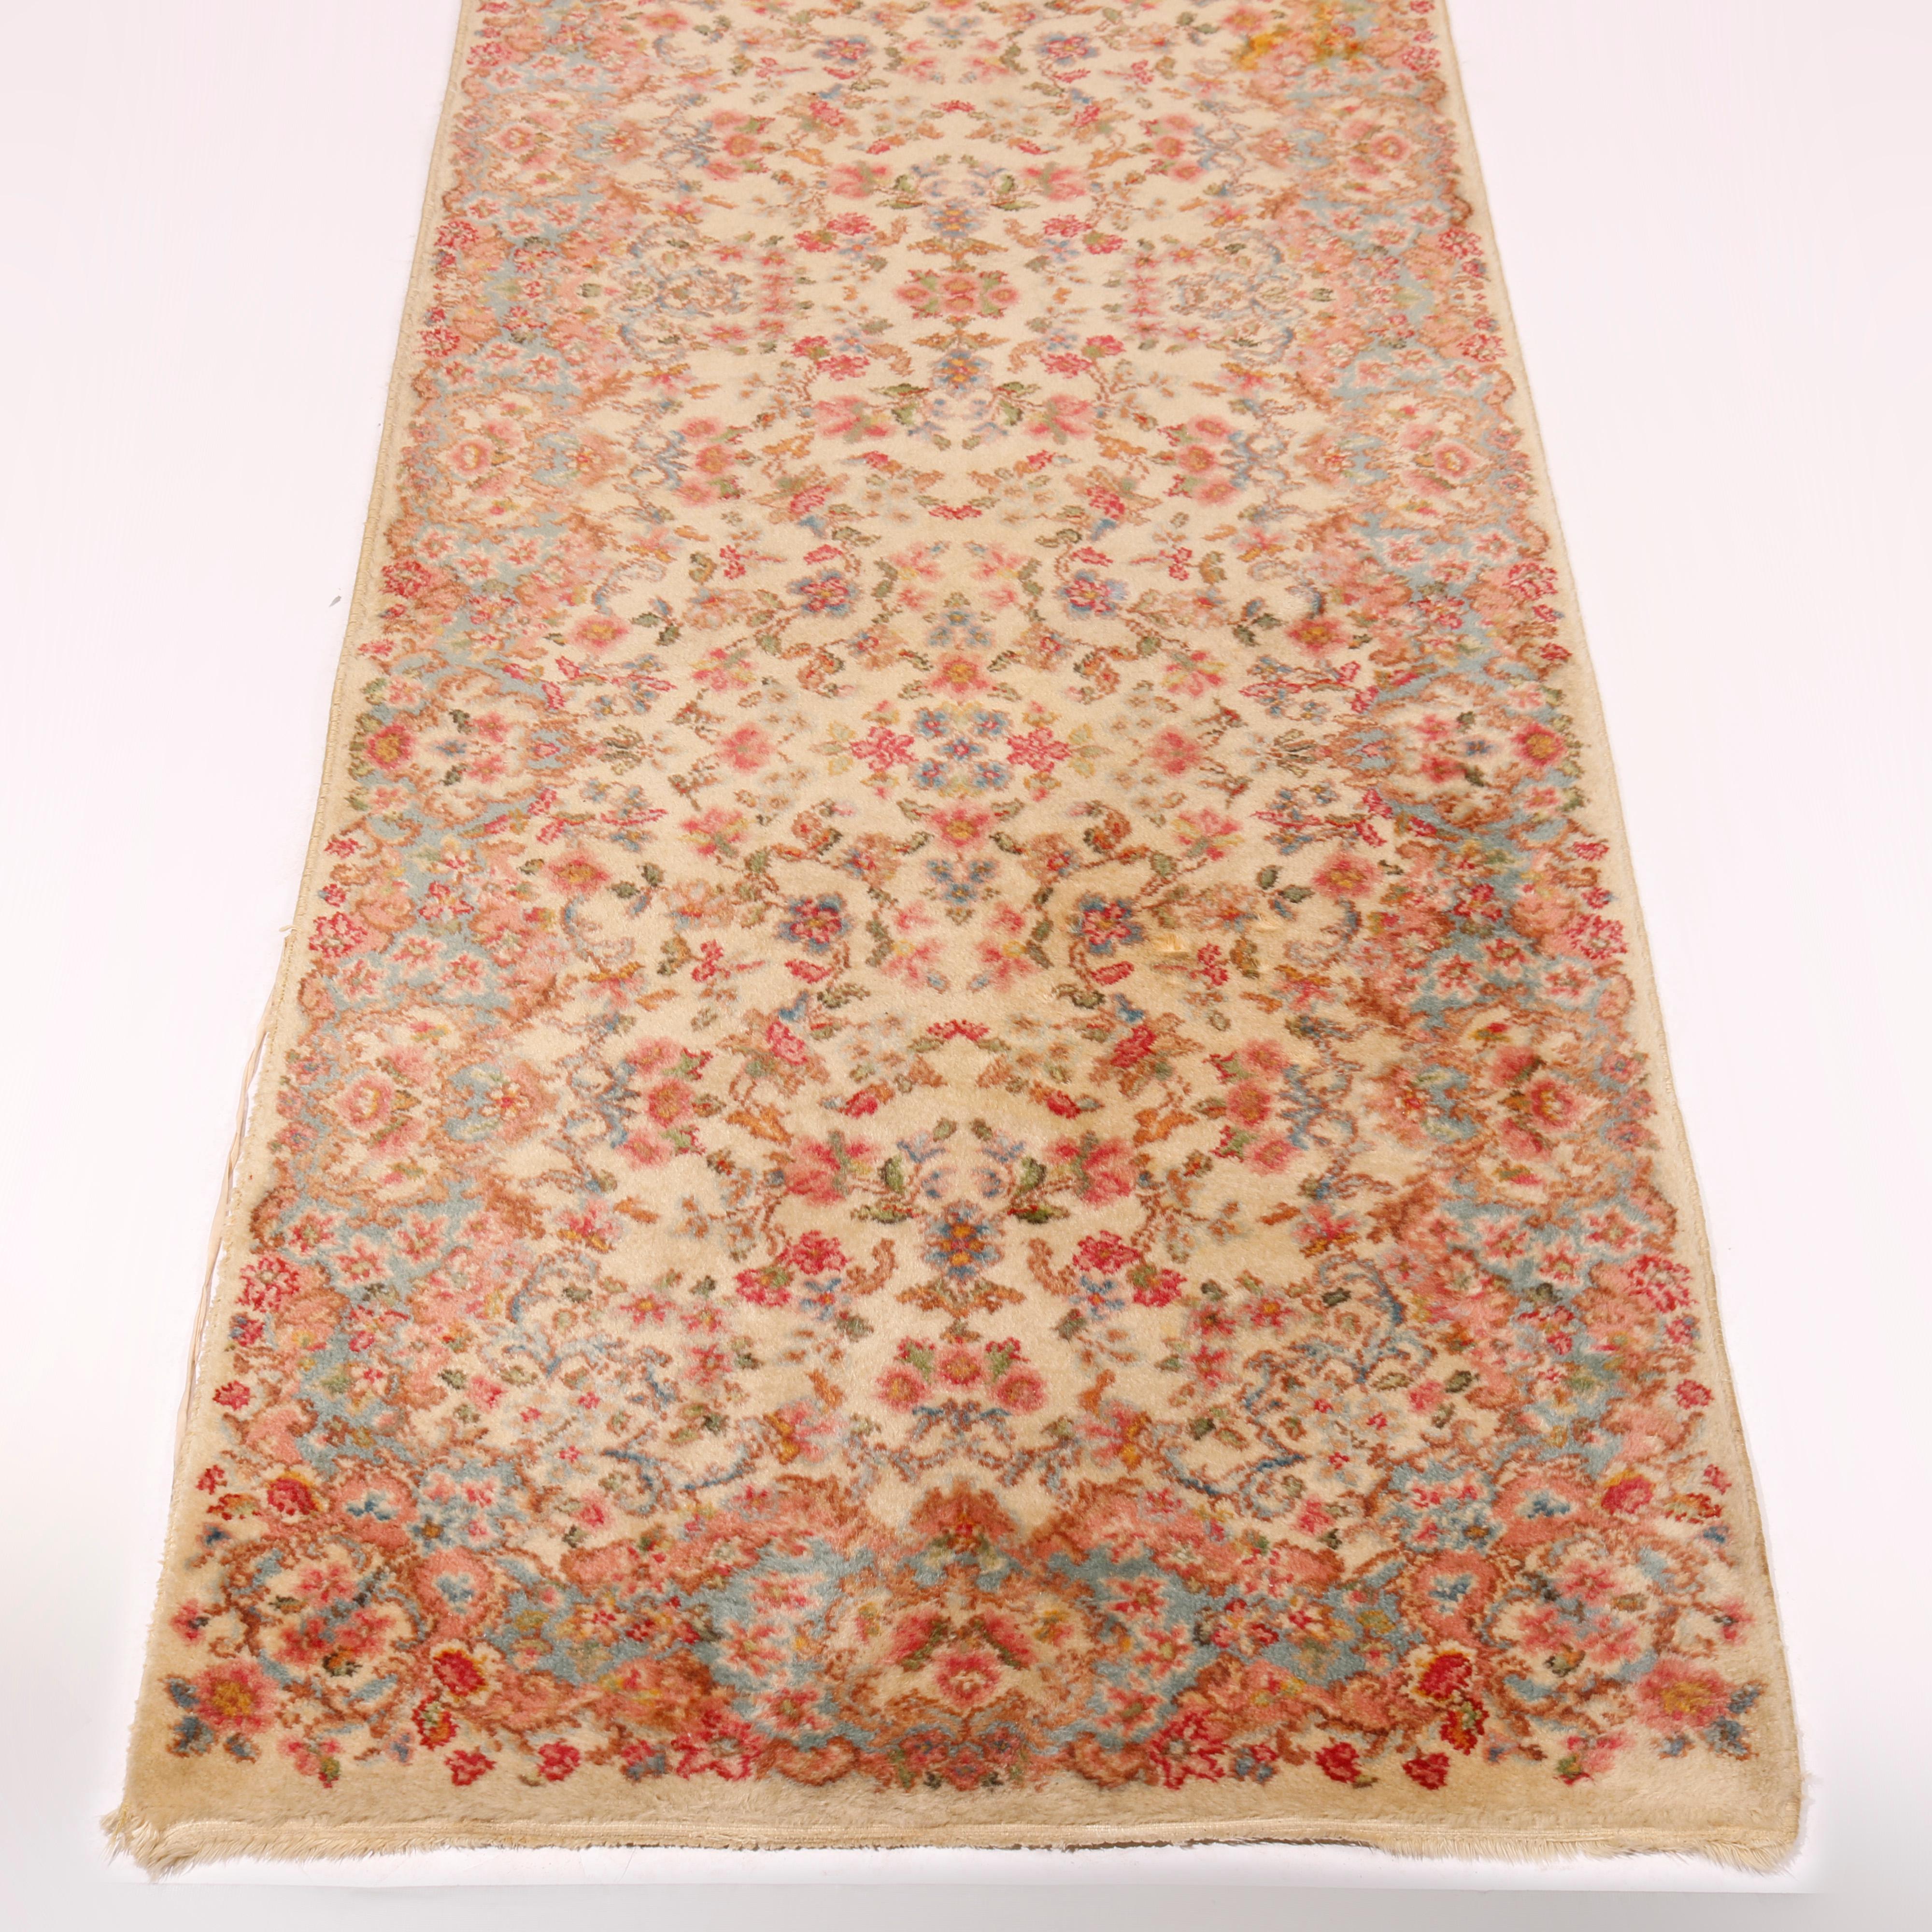 A Karastan Kirman oriental rug runner in Pattern 788 offers wool construction with floral spray throughout, maker label as photographed, circa 1950

Measures - 179'' L x 34.5'' W x .5''.